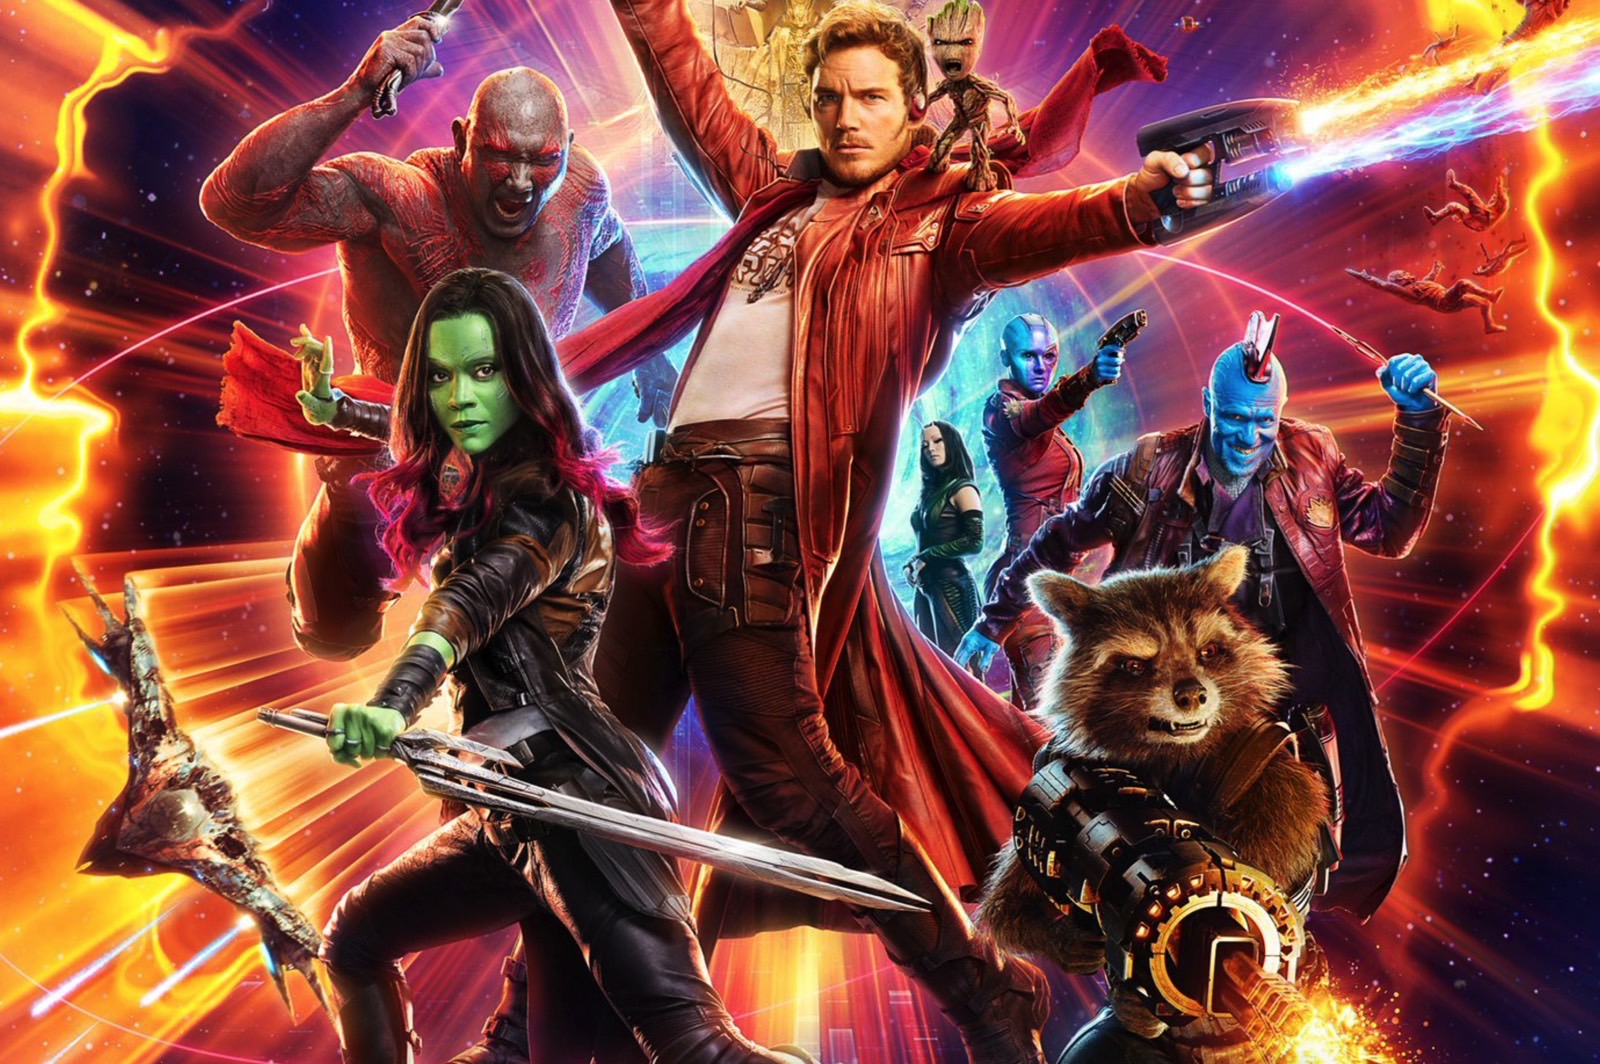 James Gunn teases Guardians of the Galaxy 3 Holiday Special on Disney+